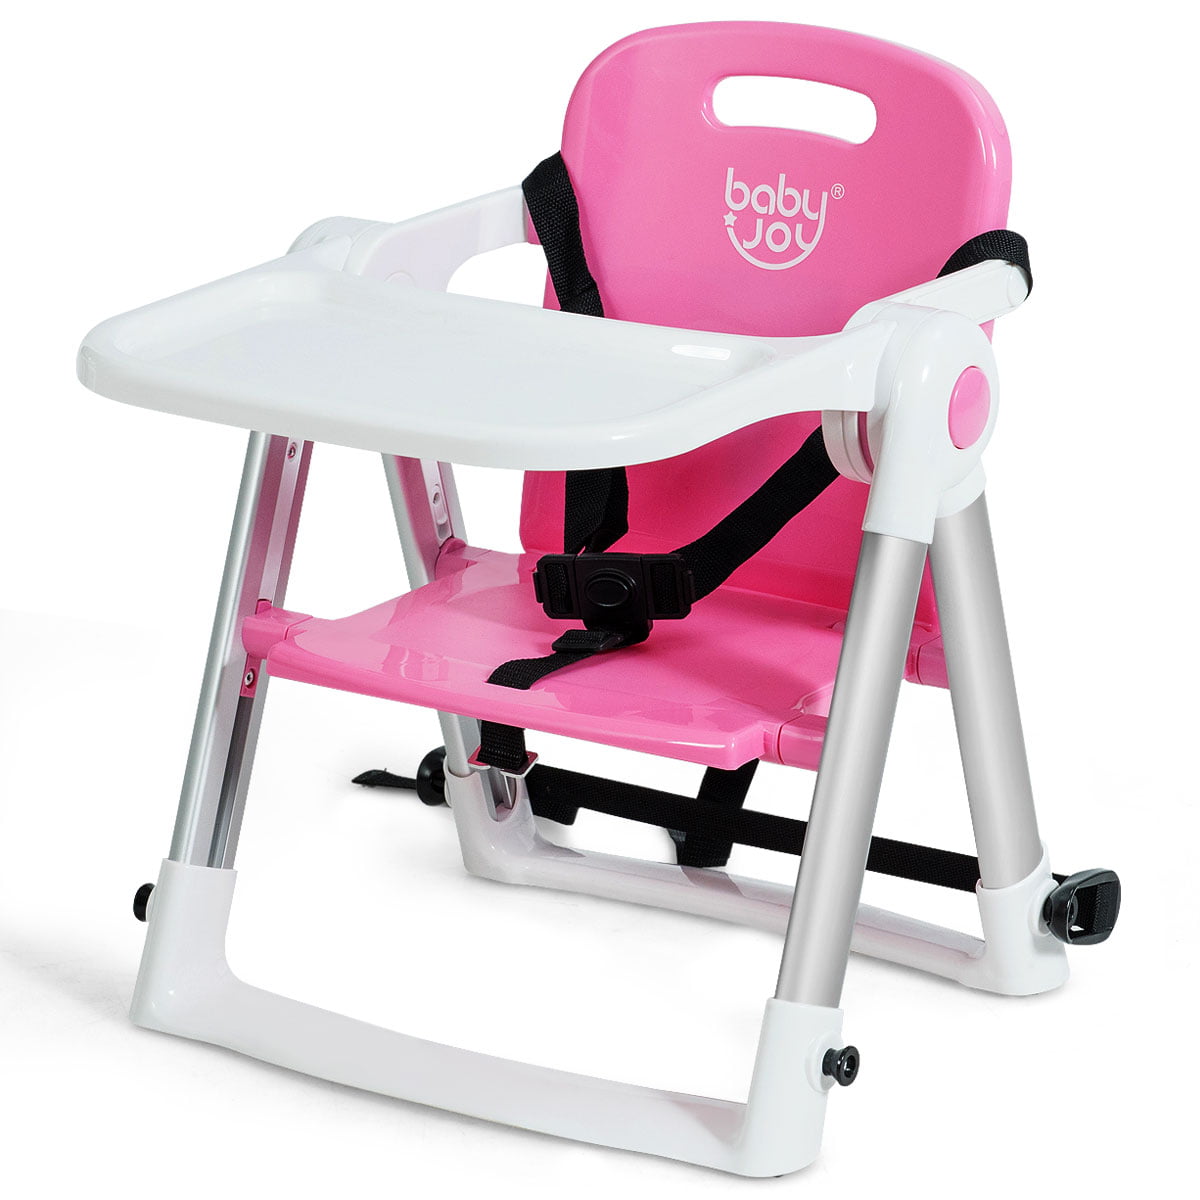 High Chair for Baby Adjustable Height with Safety Belt and Adjustable Tray Folding Baby Chair